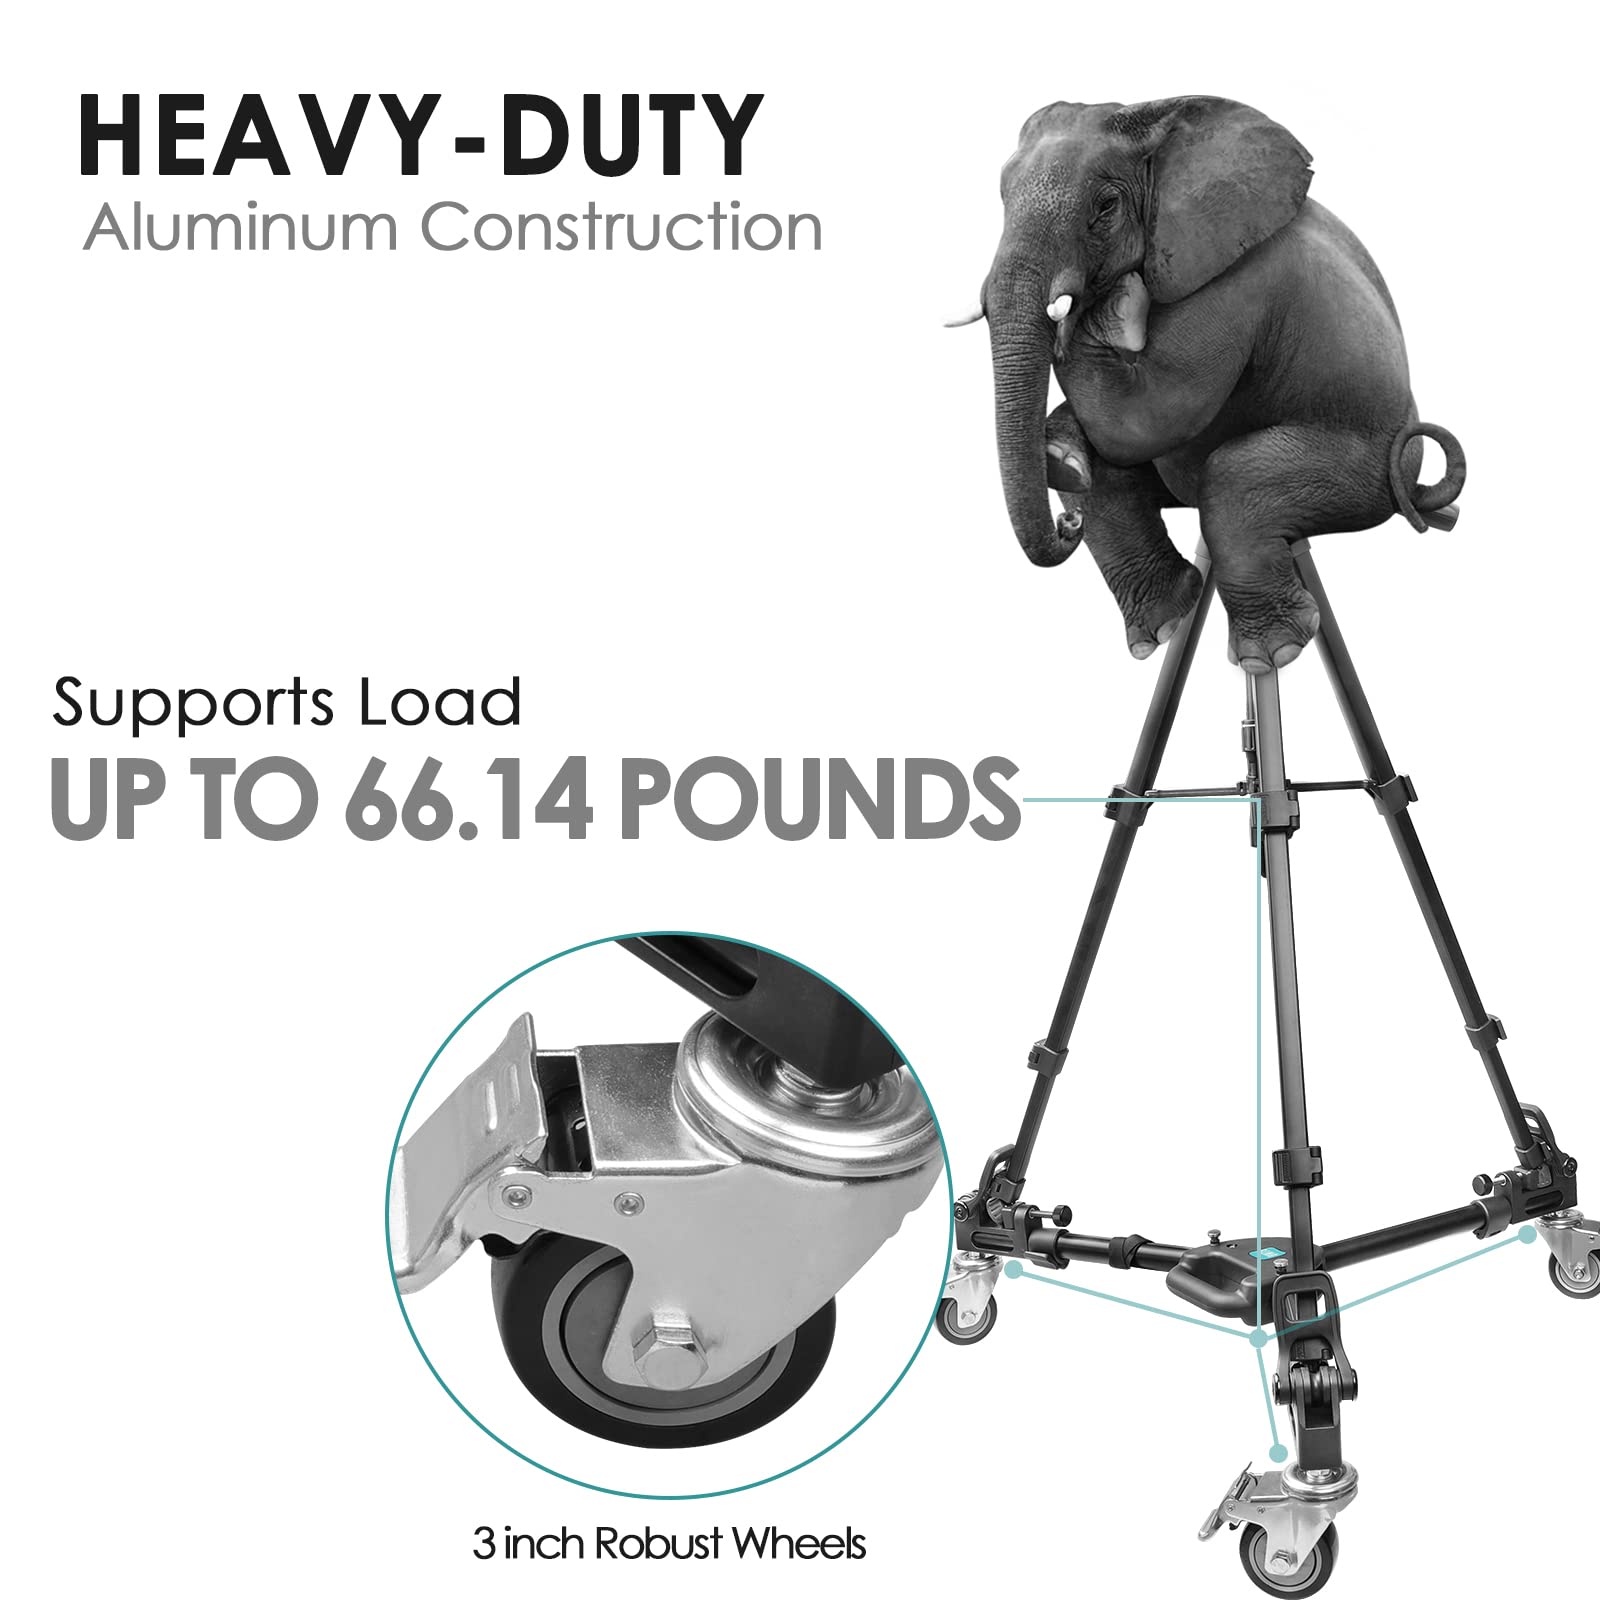 Heavy Duty Tripod Dolly, HTURS Professional Video Camera Dolly with Larger 3-inch Rubber Tripod Wheels, Adjustable Leg, Bag Compatible with Most DSLR Camera Tripods/Light Stand, Load Up to 66.14 LBS